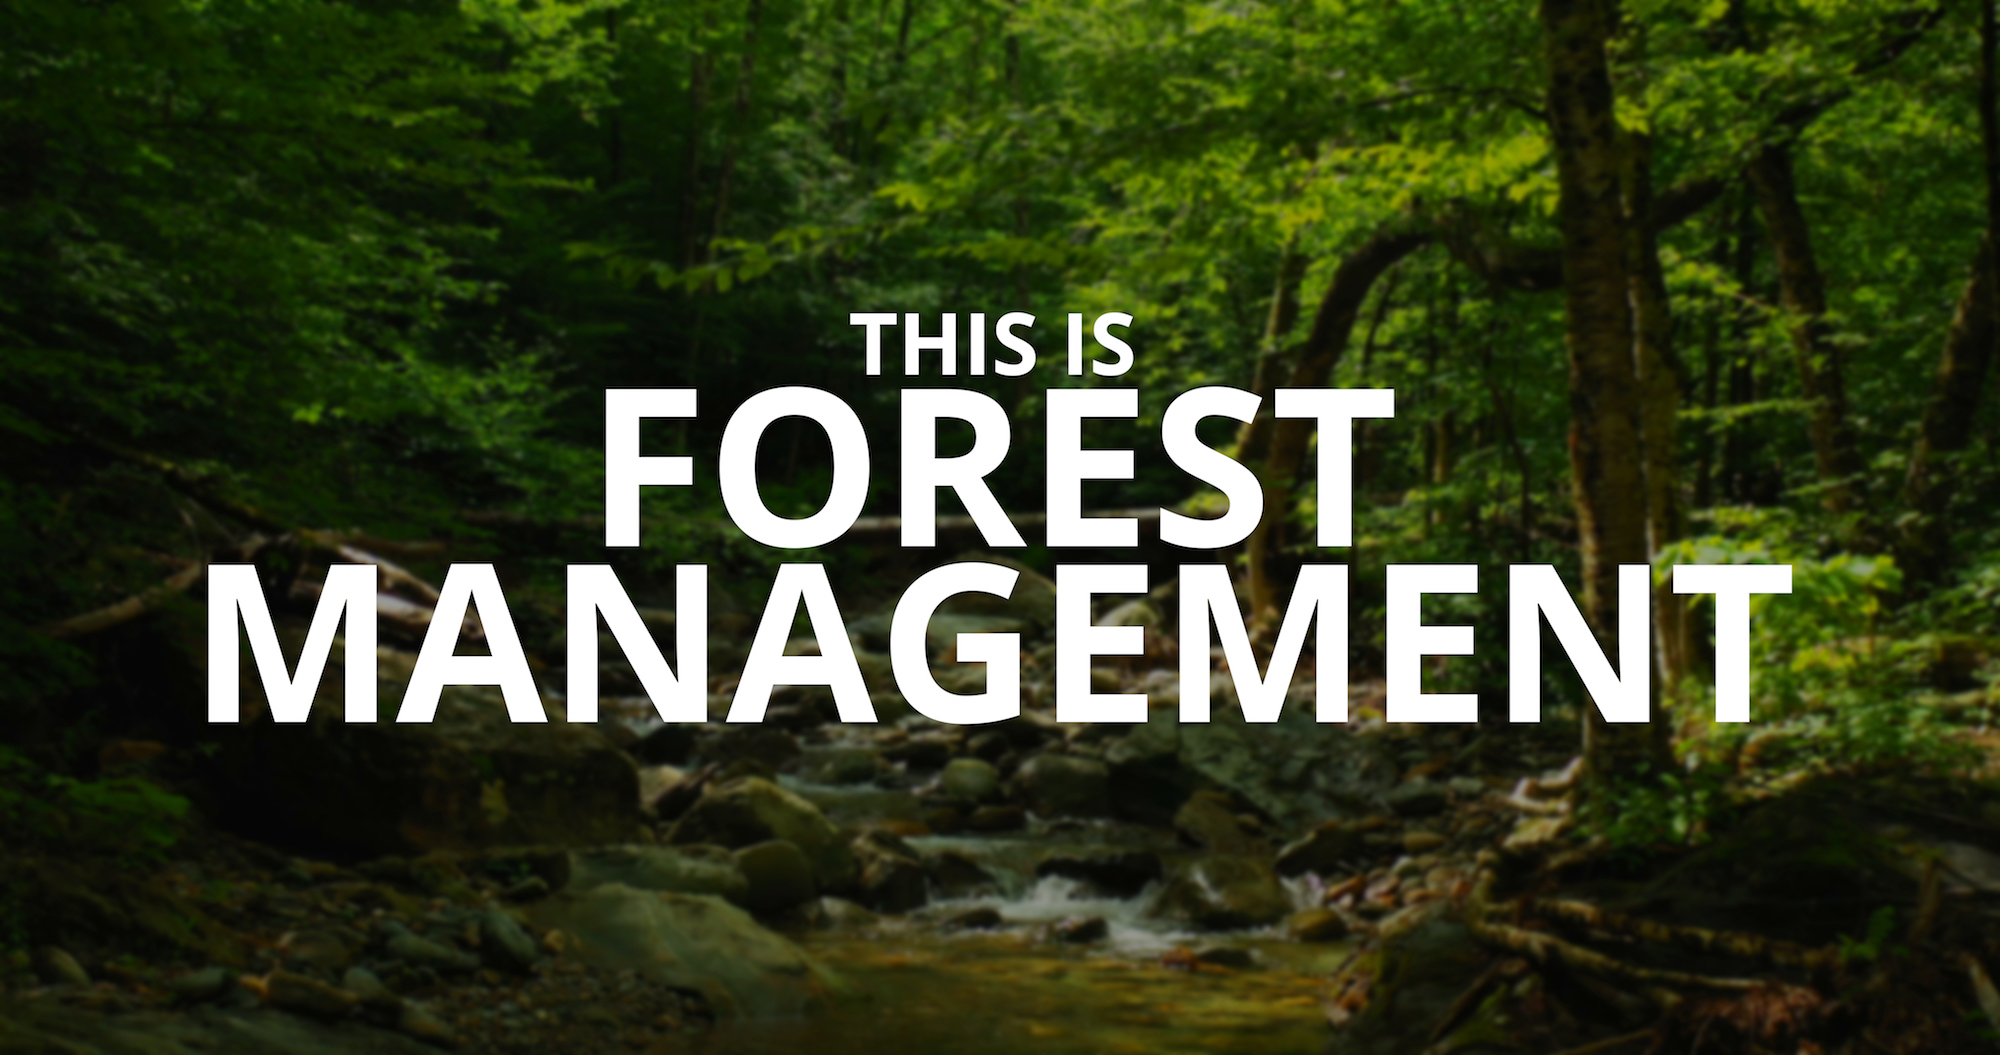 Text "This is Forest Management" over a picture of a forest stream